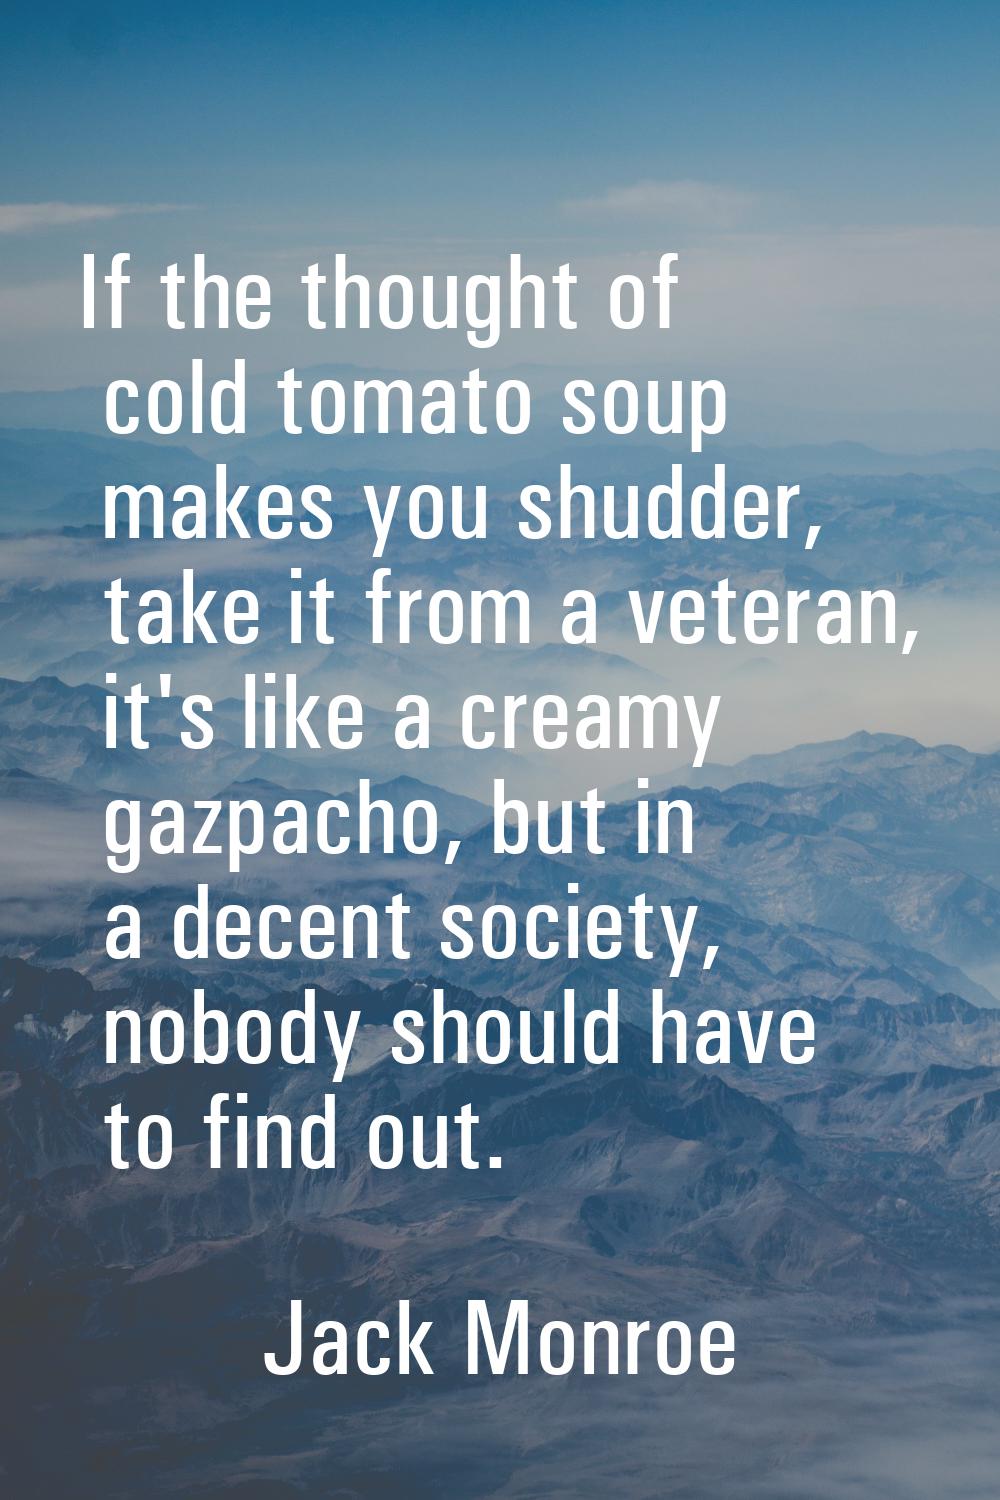 If the thought of cold tomato soup makes you shudder, take it from a veteran, it's like a creamy ga